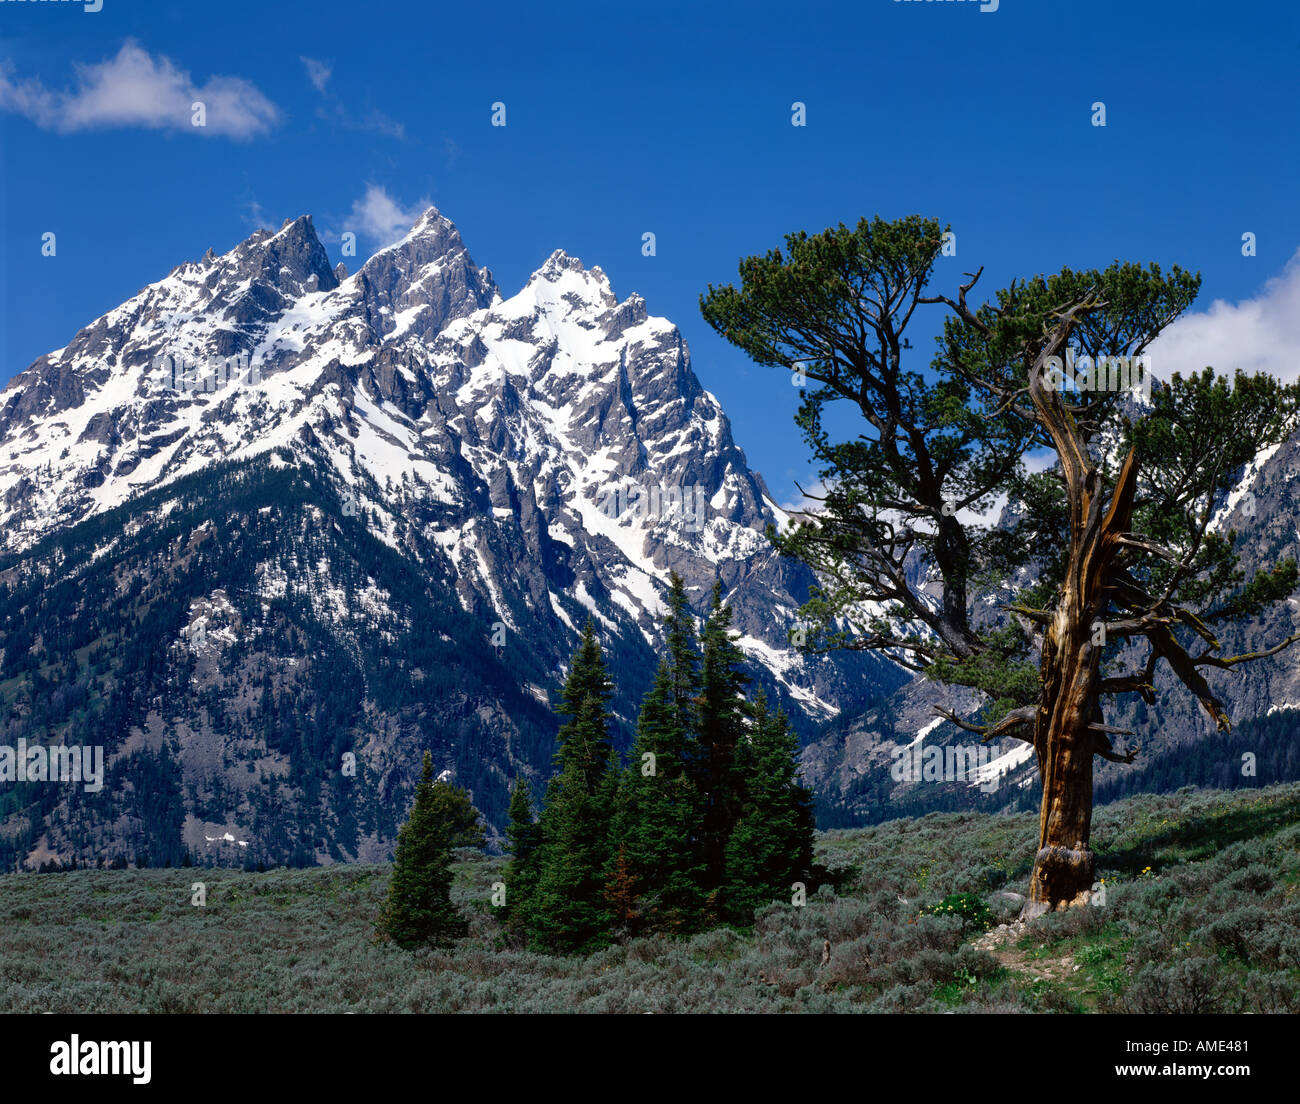 Grand Teton National Park in Wyoming showing the Cathedral view of the peaks framed with an Old Limber Pine tree Stock Photo